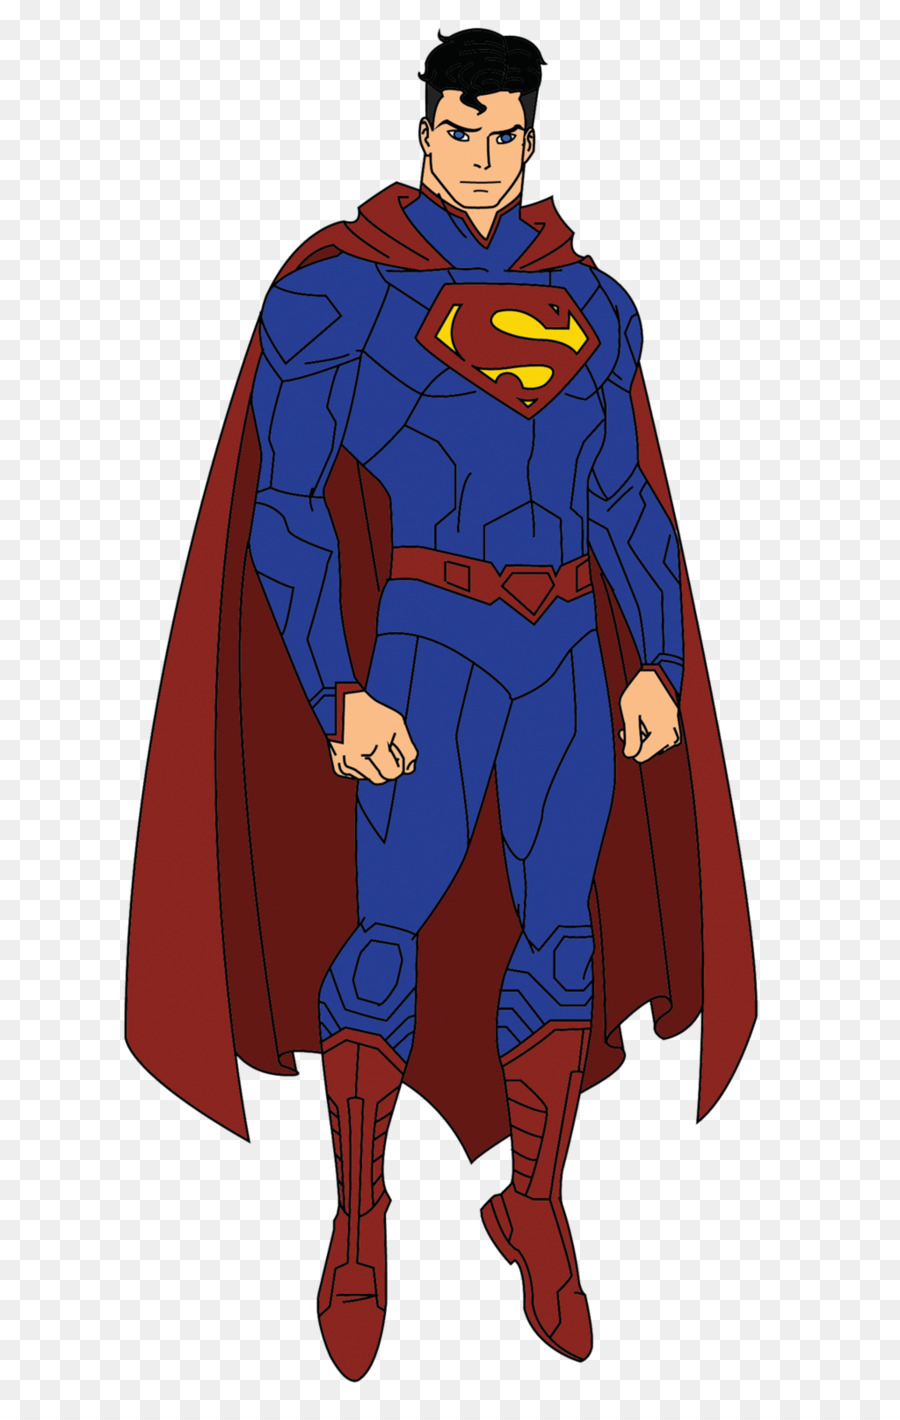 Superman Drawing Pictures at GetDrawings | Free download